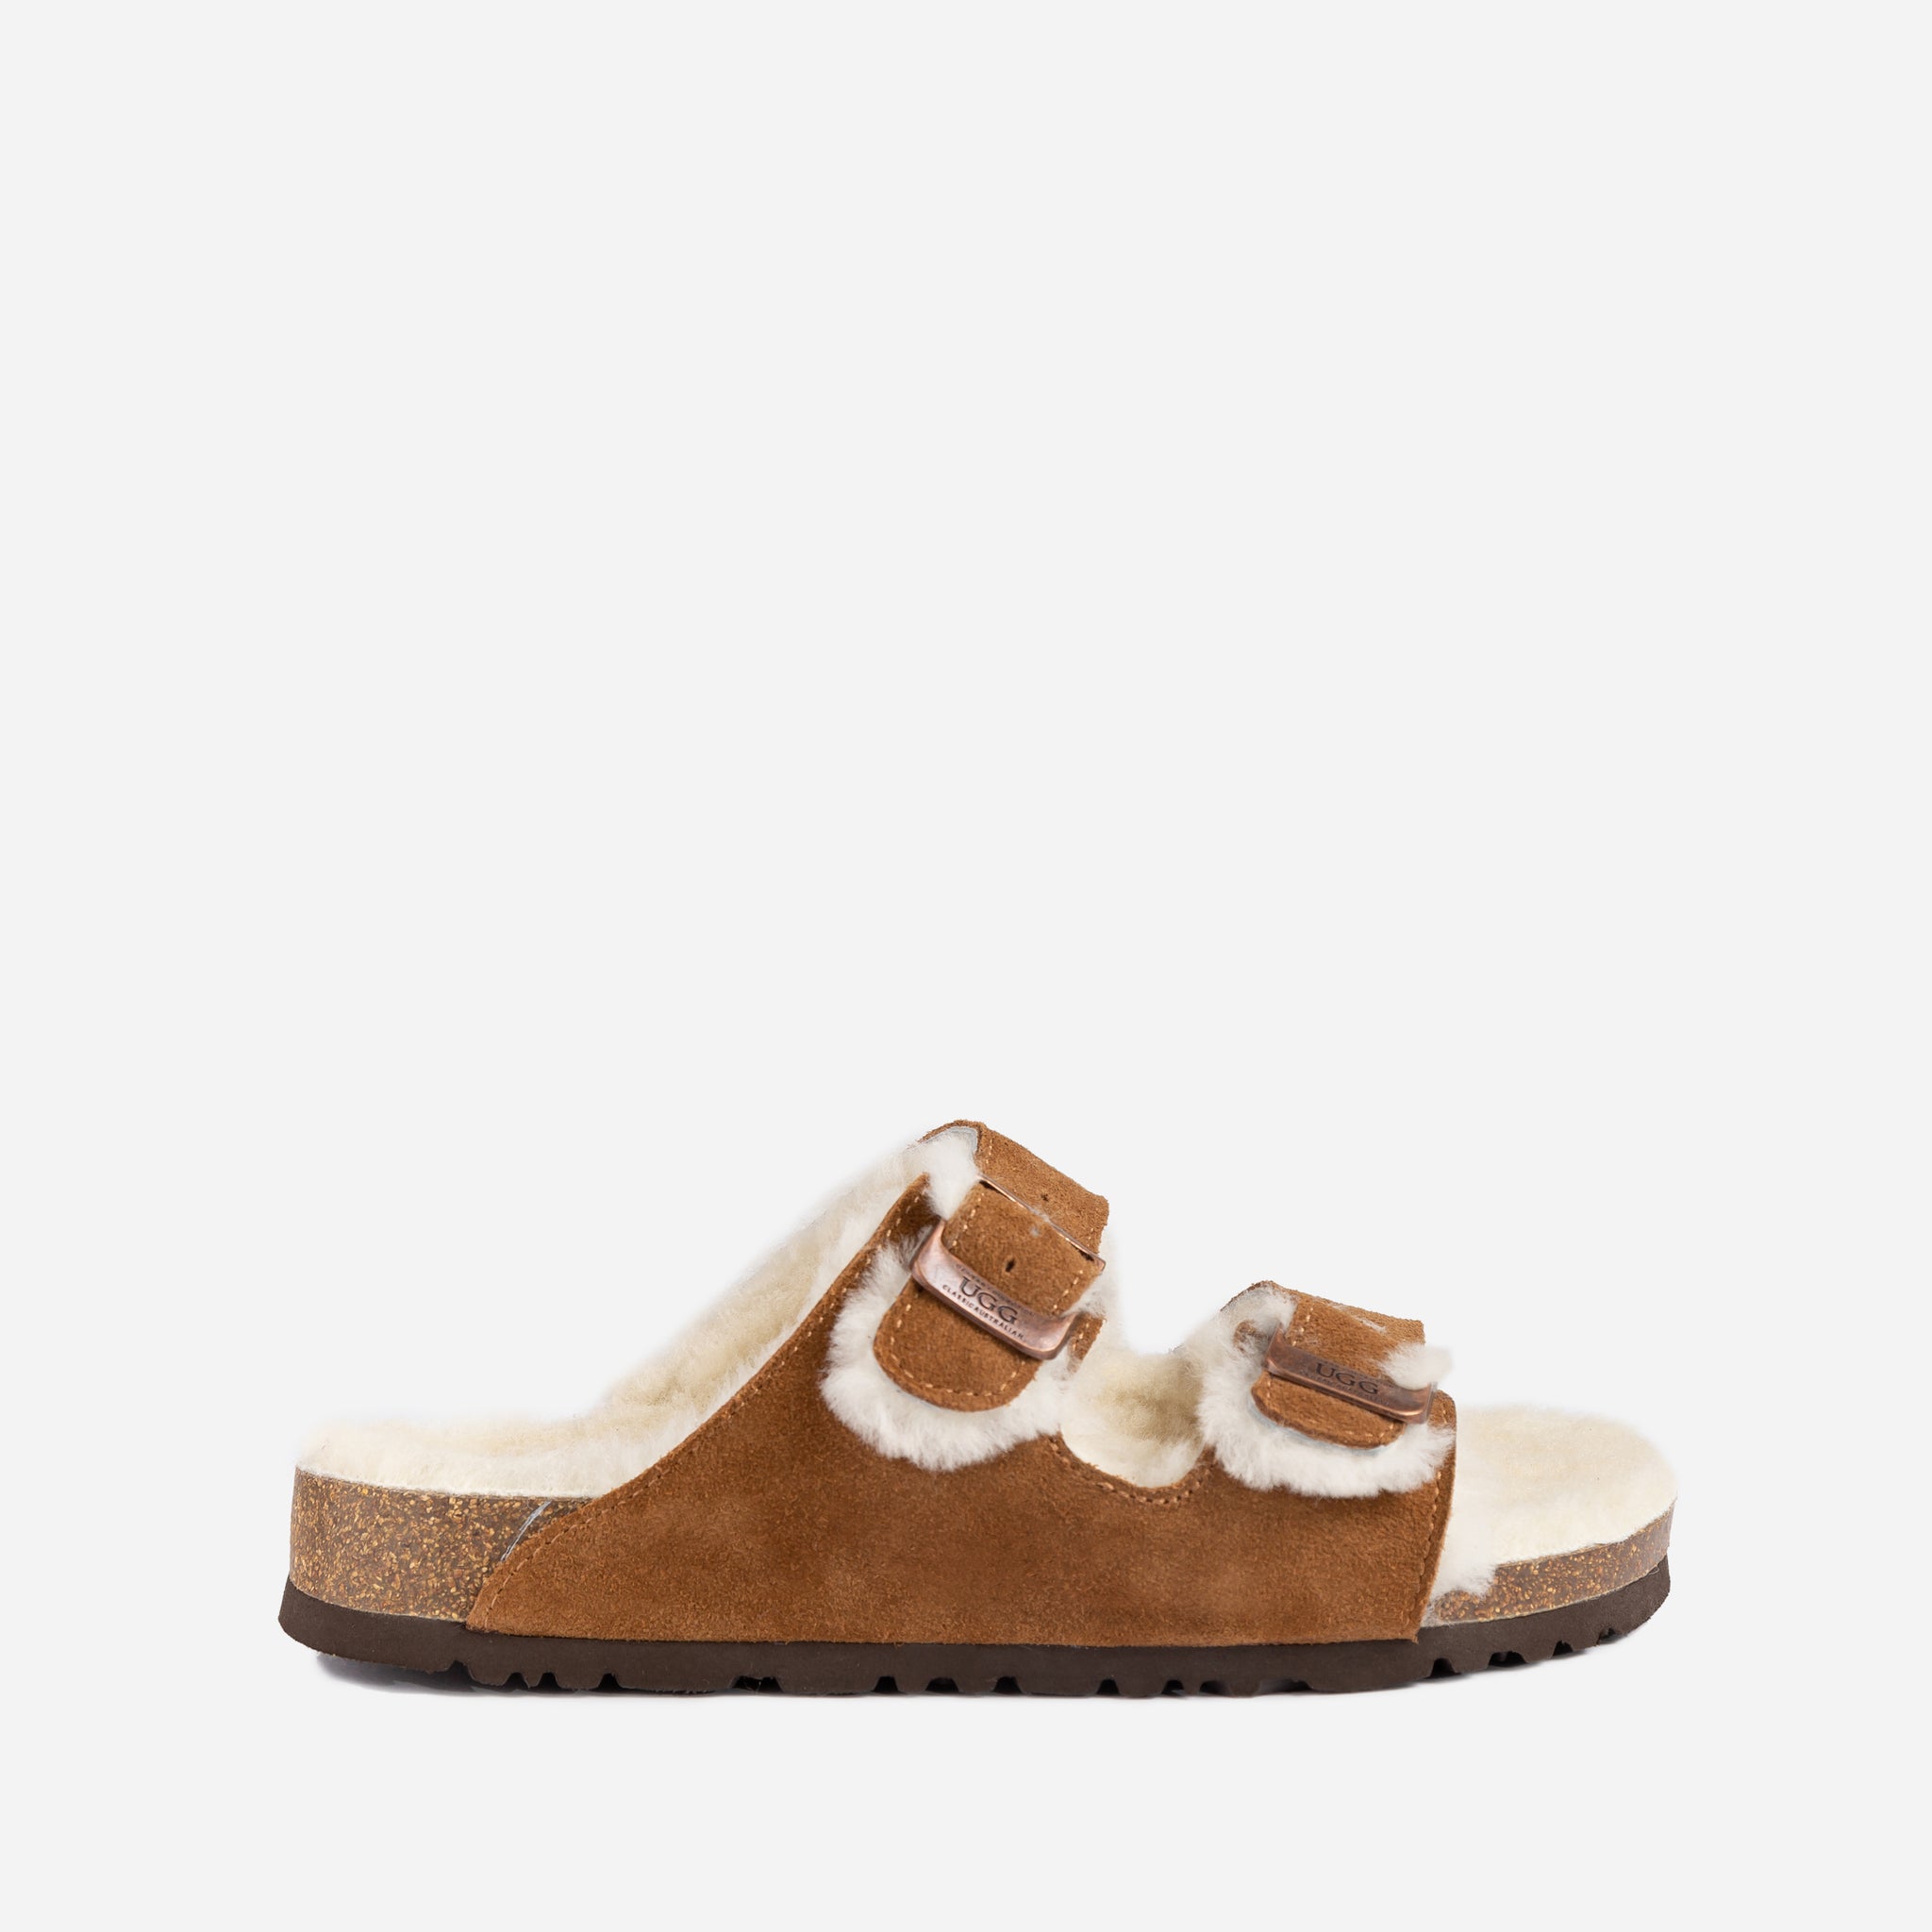 UGG Aussie Shearling Buckled Sandals